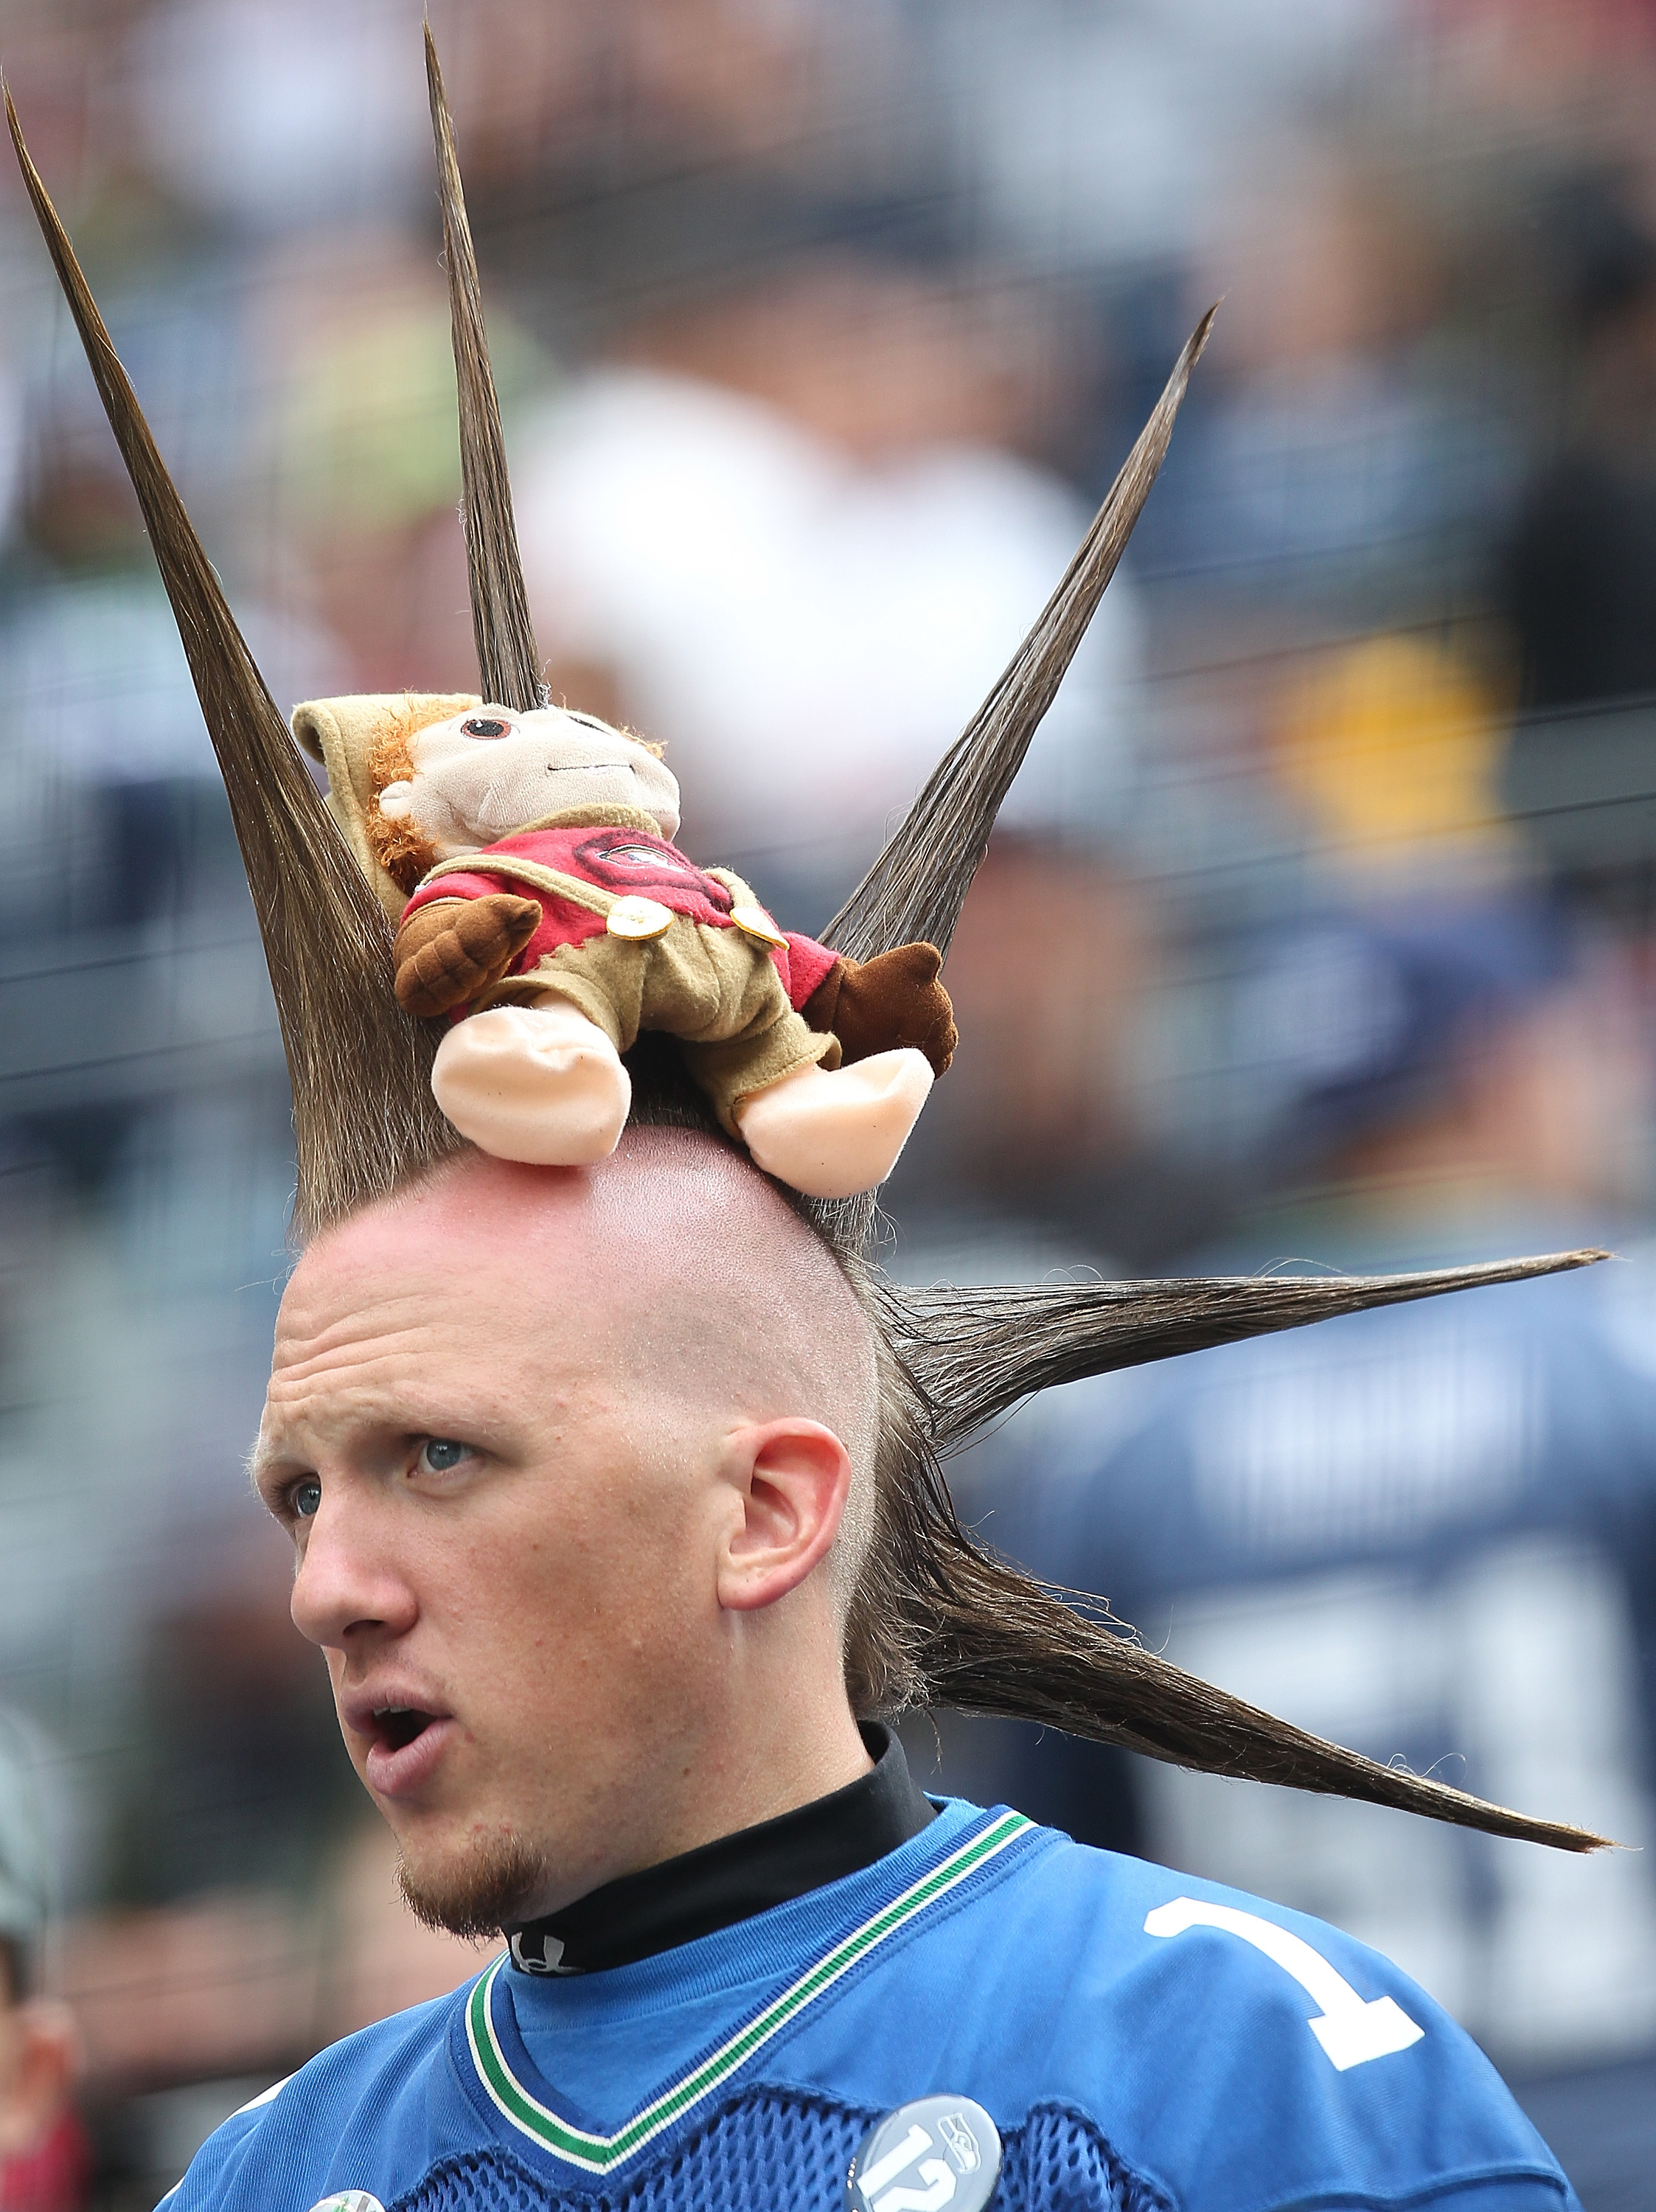 SEATTLE - SEPTEMBER 12:  A fan of the Seattle Seahawks wears a 49er doll on his head, pierced by a spike of his hair during the NFL season opener against the San Francisco 49ers at Qwest Field on September 12, 2010 in Seattle, Washington. The Seahawks def